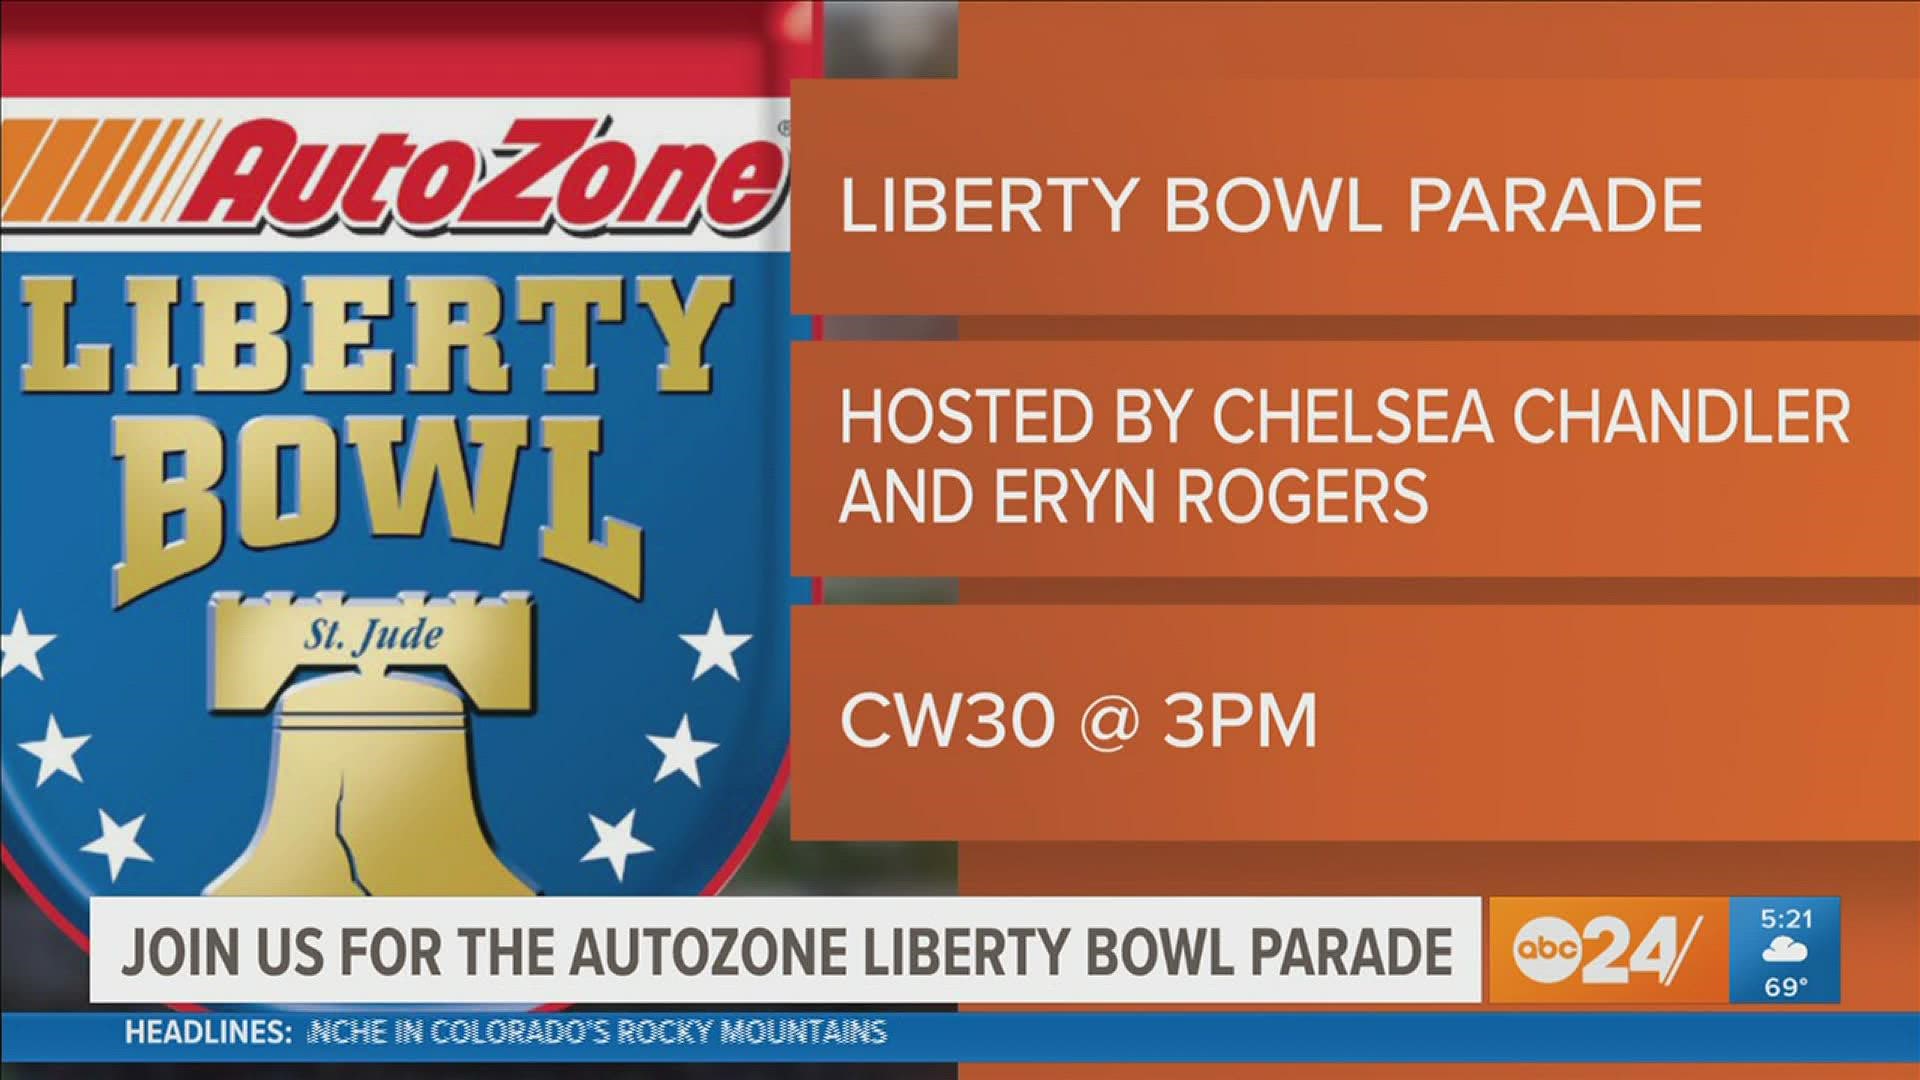 You can catch the parade live on CW30 from 3 to 4 p.m. on Monday.